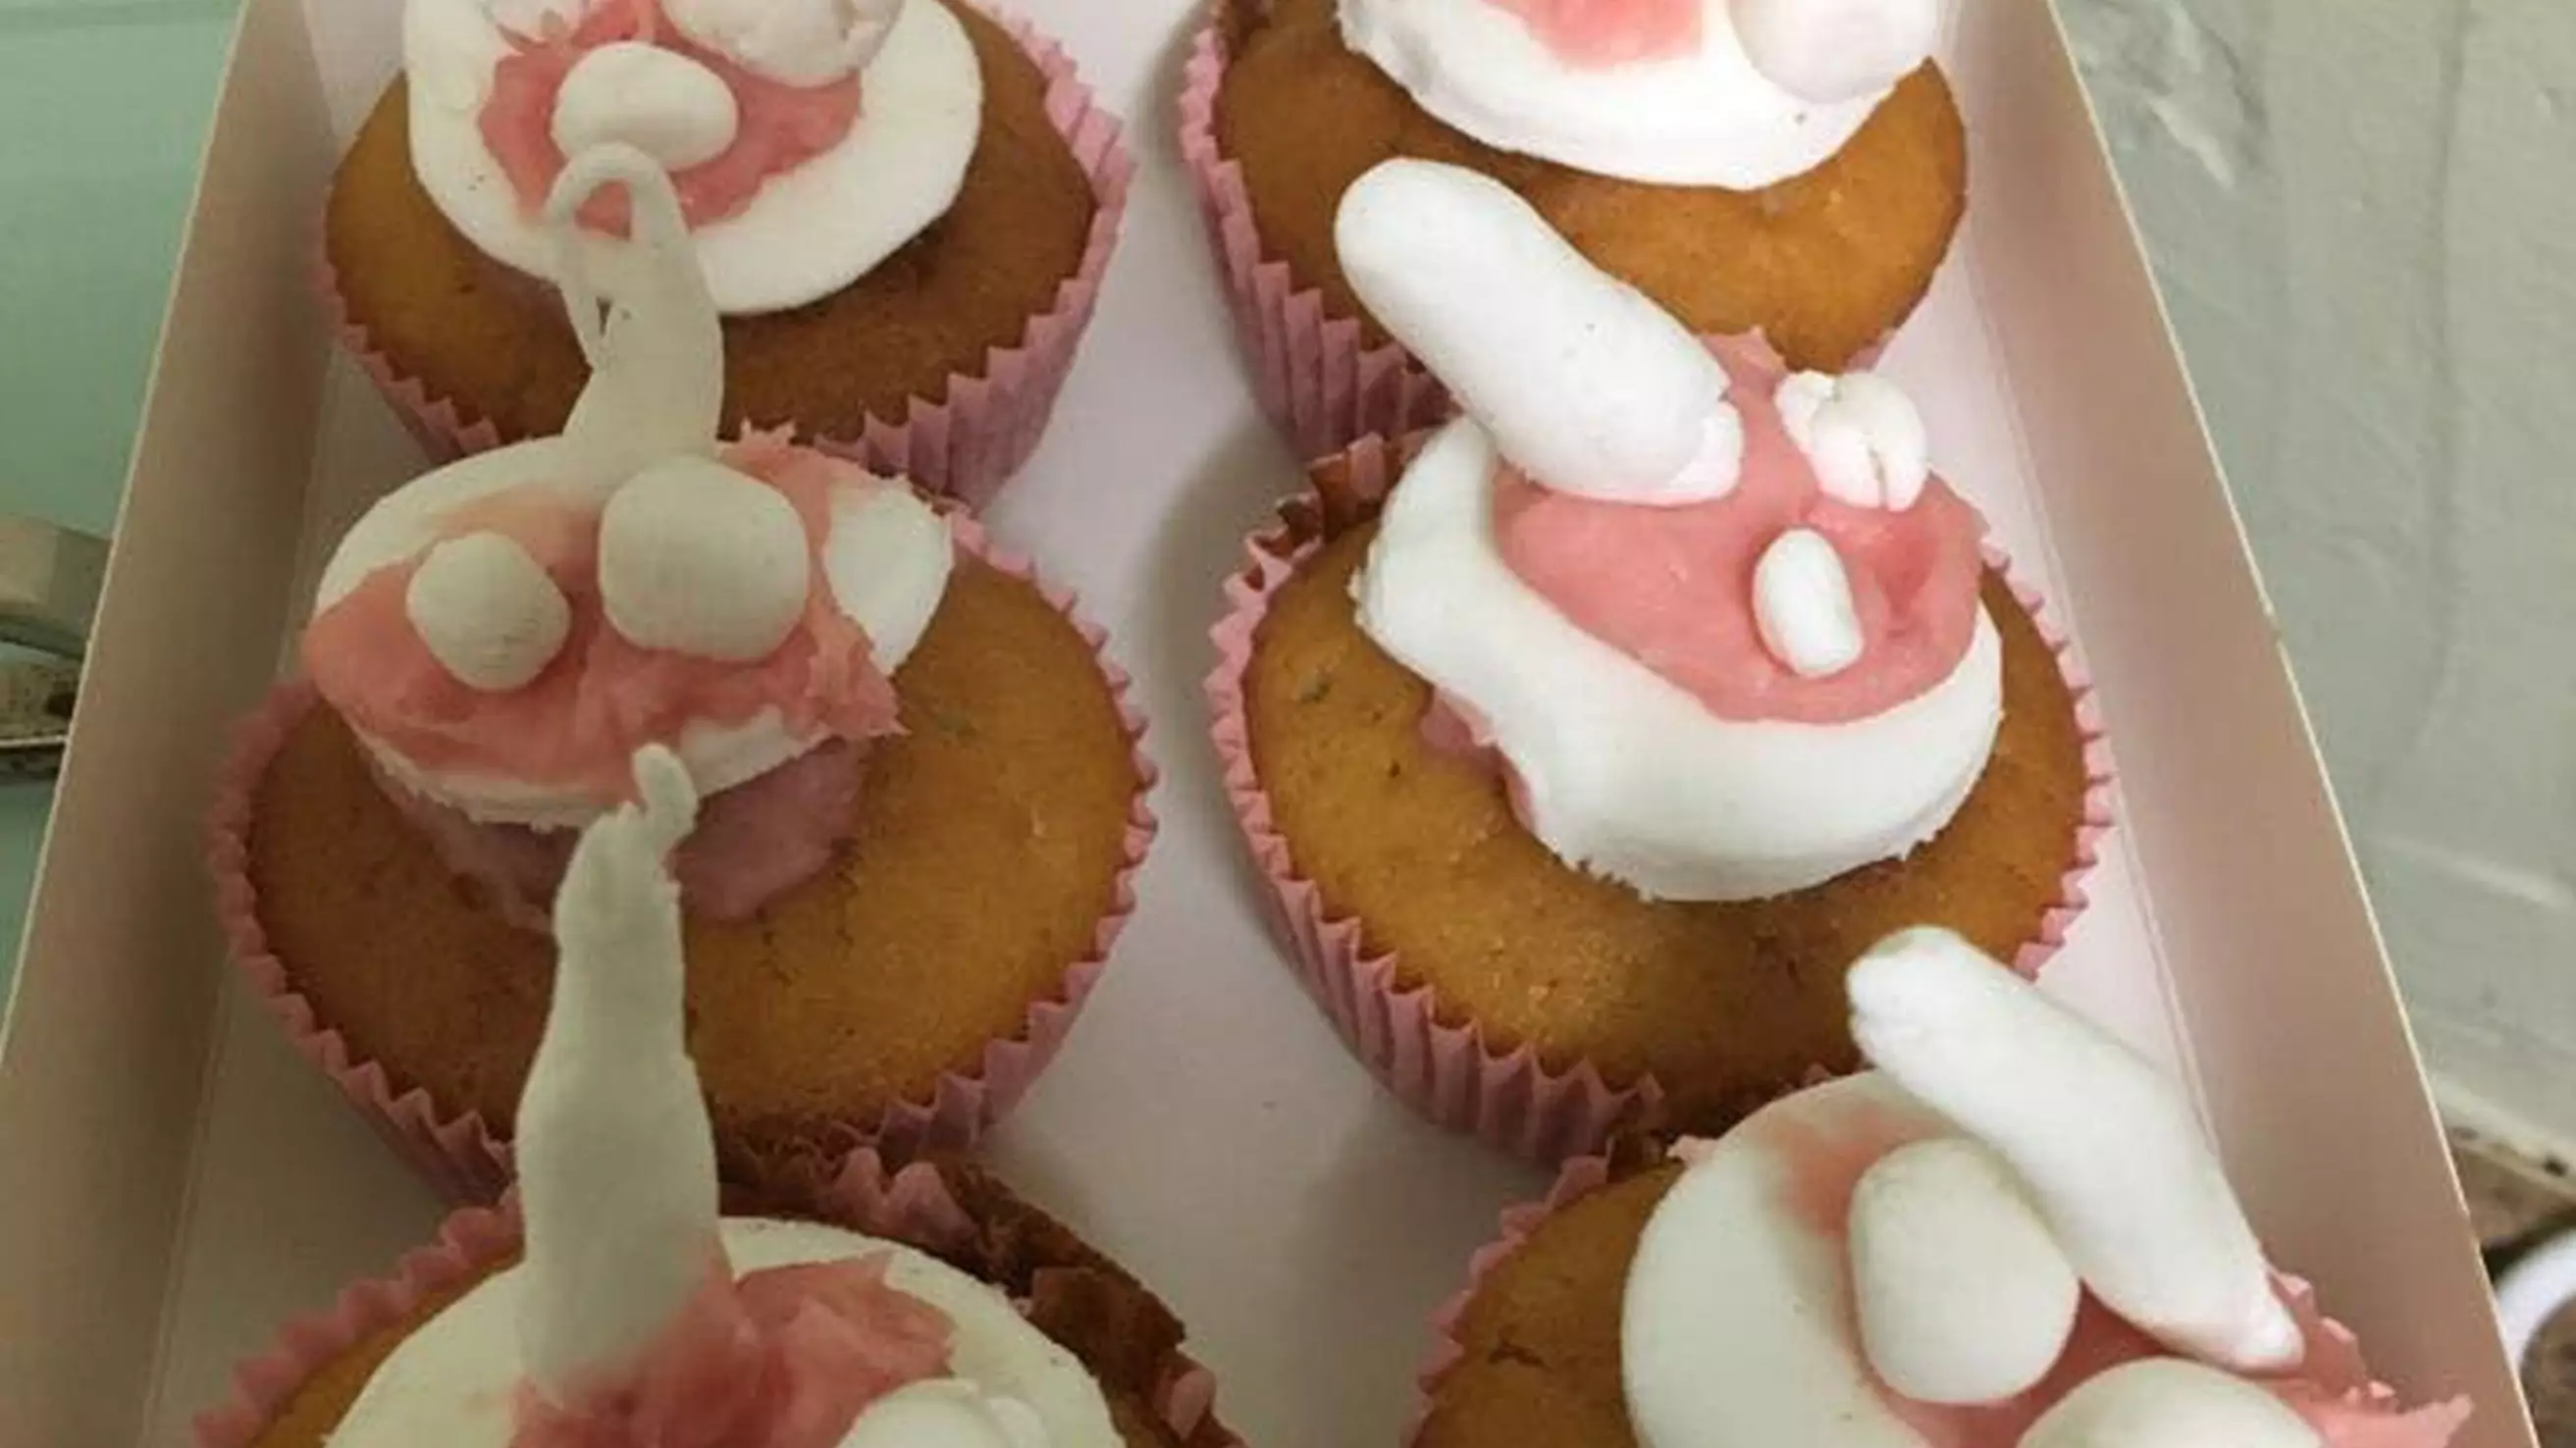 Nan Mortified After Granddaughter's 'Unicorn' Cakes Turn Out Looking A Lot Like Something Else 